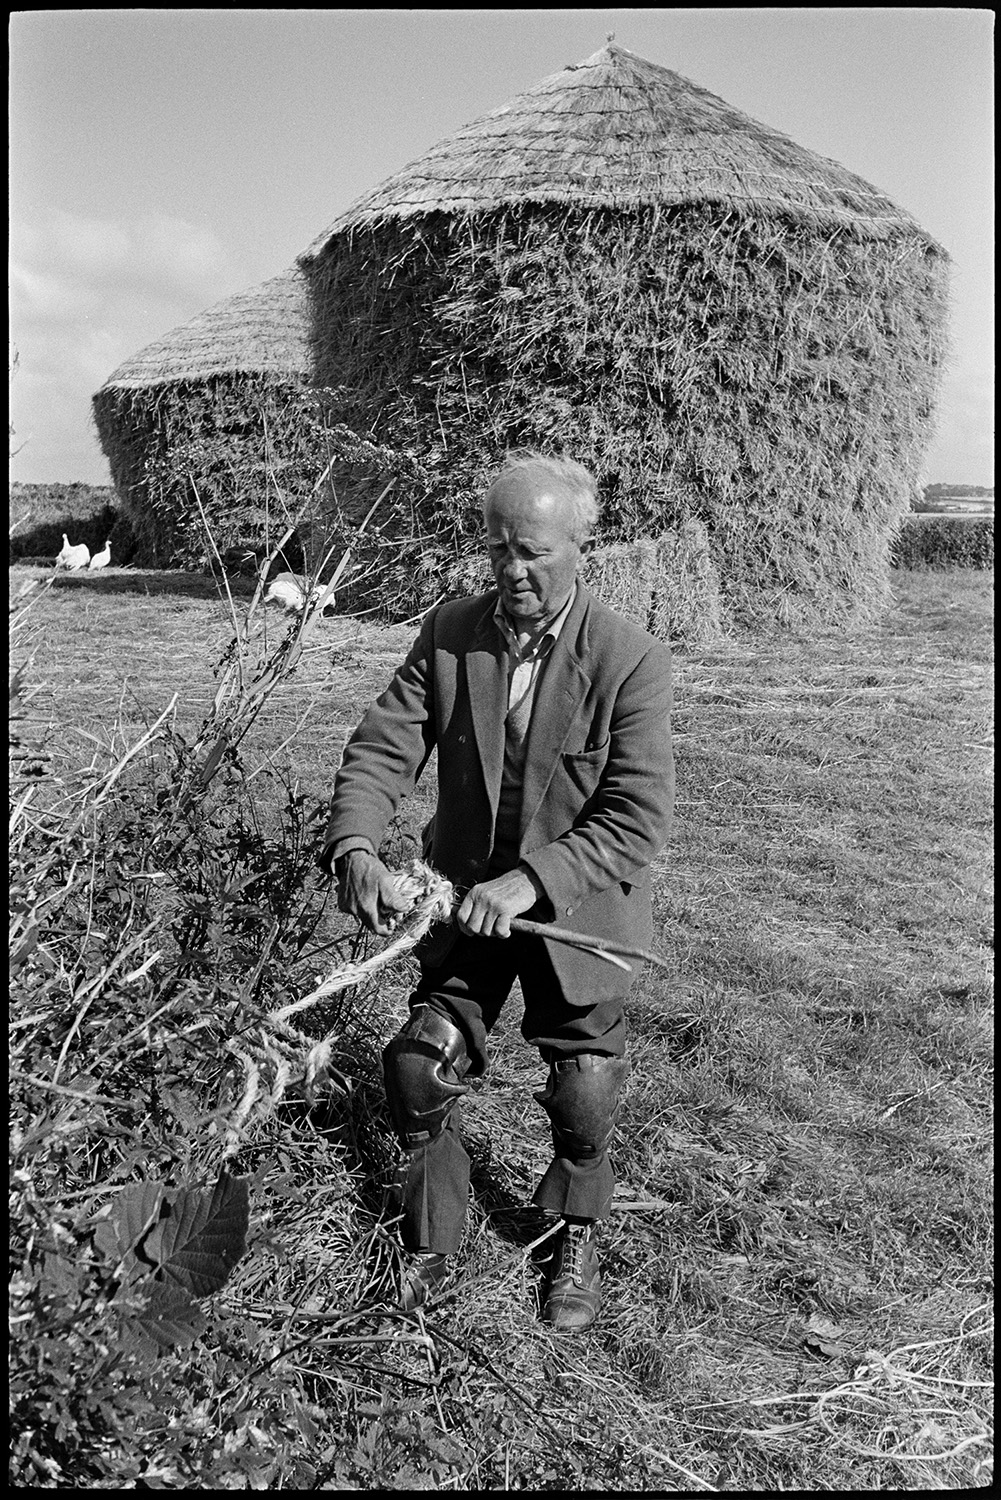 Thatcher thatching wheatrick, making rope on a wink.
[Bill Hammond making a rope on a wink in a field at Westacott, Riddlecombe. Two thatched wheat ricks, and some turkeys, are in the background.]